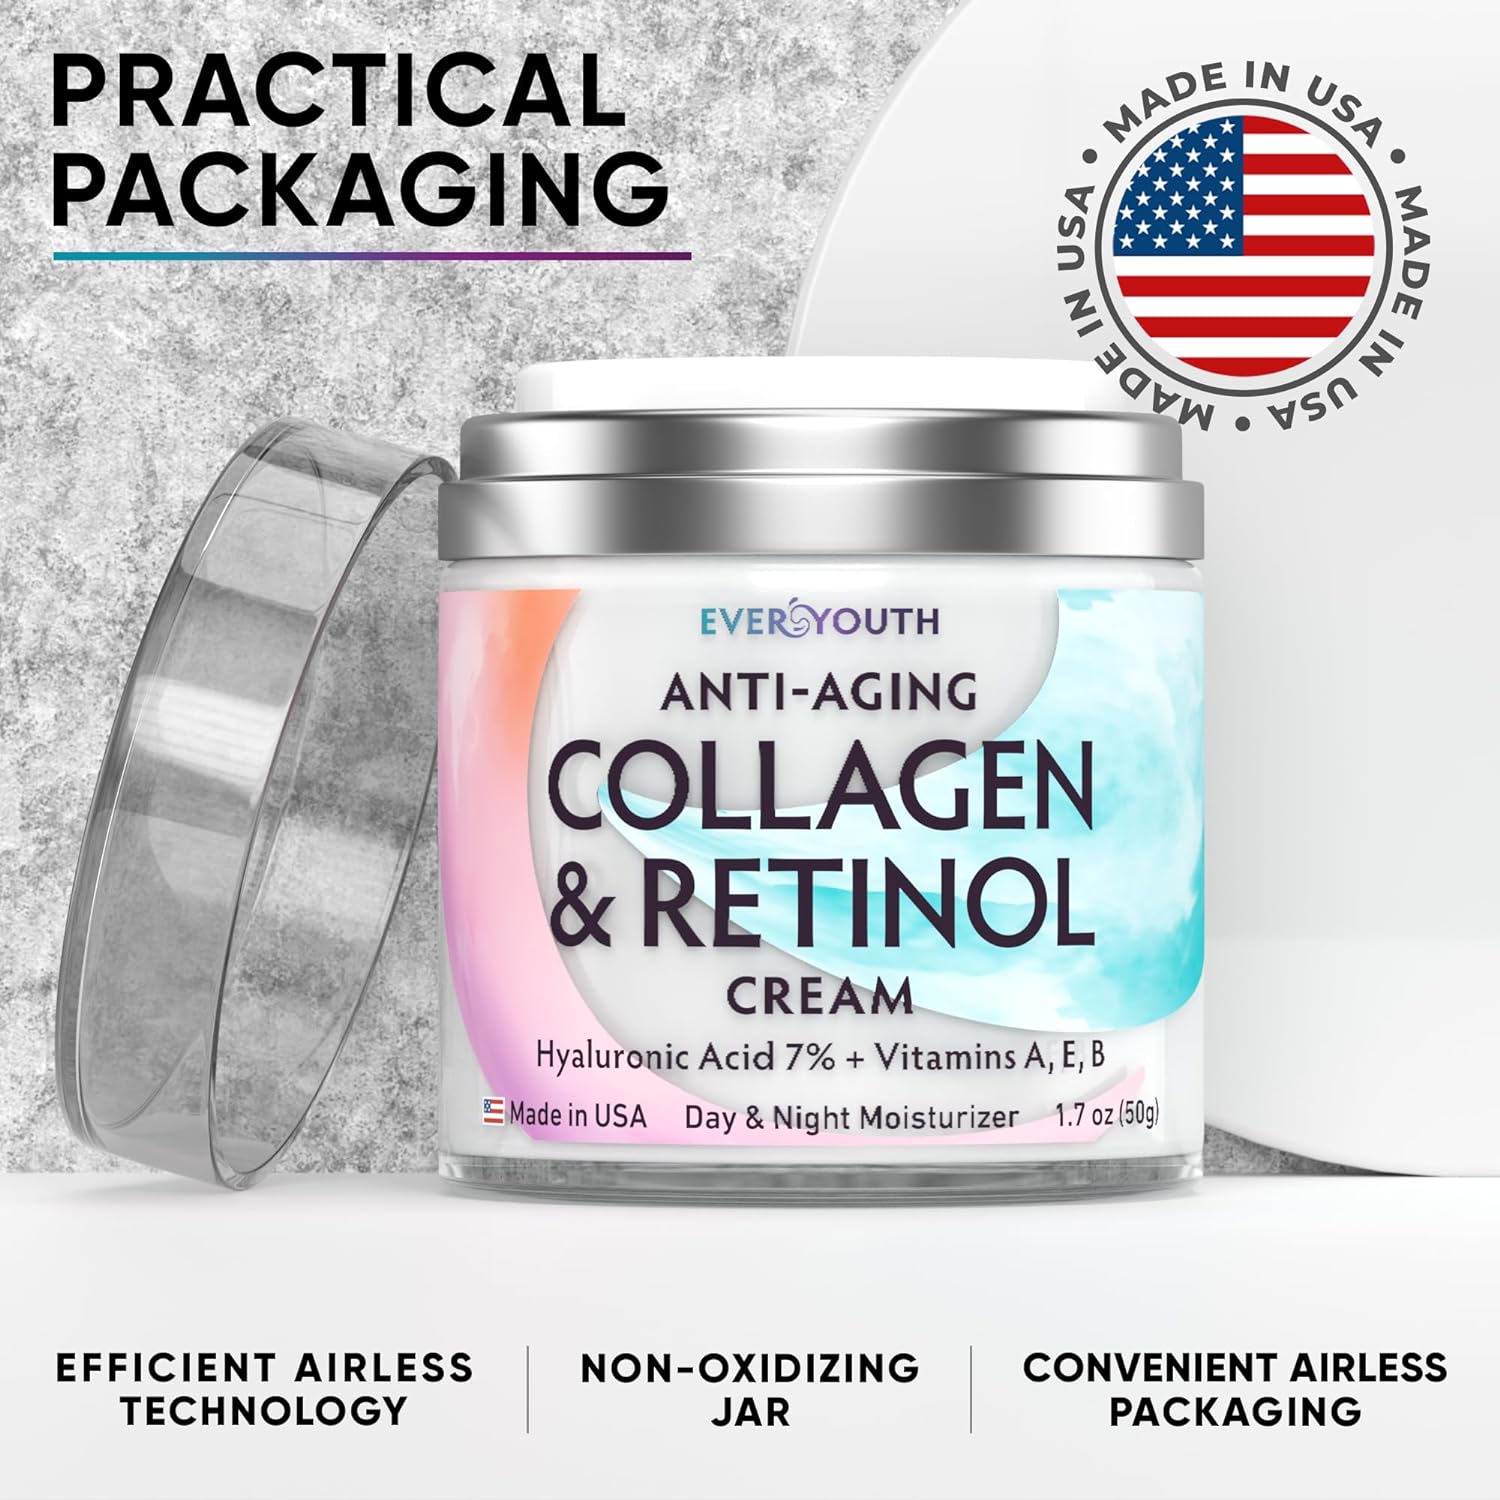 EVERYOUTH Collagen Retinol Face Moisturizer with Hyaluronic Acid - Moisturizer Face Cream - Made in USA - Day  Night Cream for Women - Anti Wrinkle Cream for Face - Daily Facial Moisturizer - 1.7oz